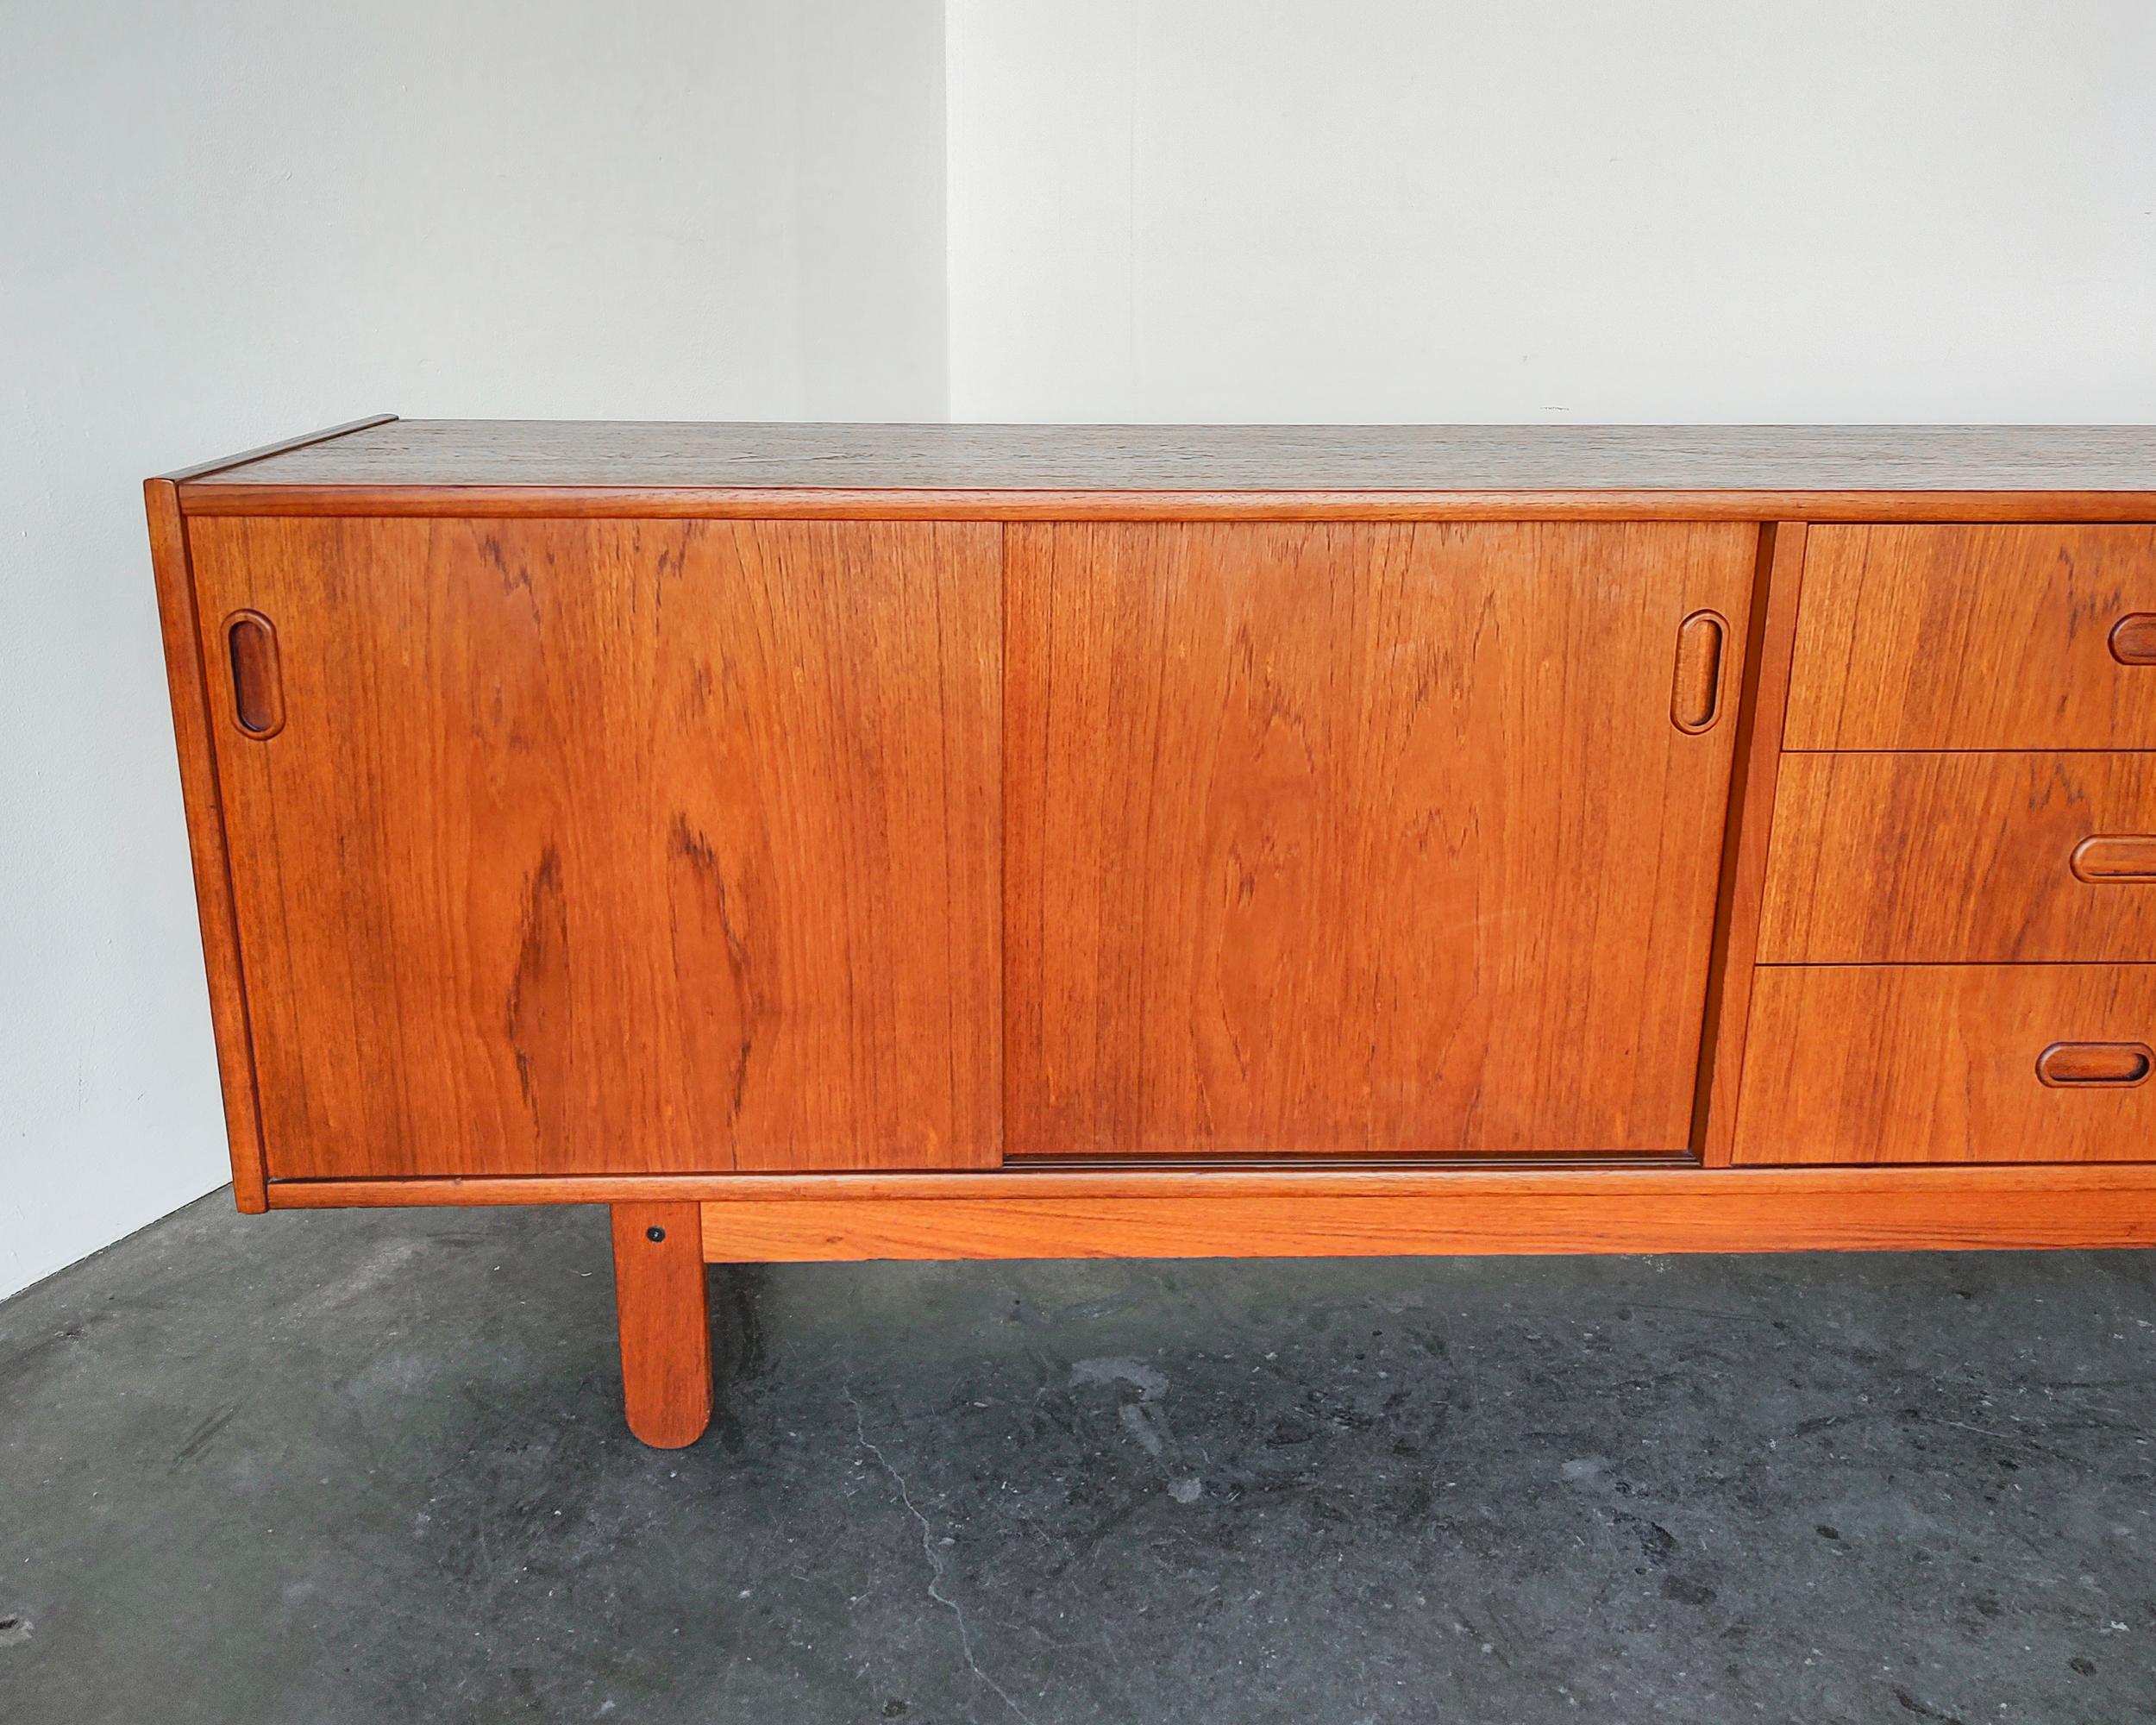 Danish Mid-Century Modern Teak Credenza by Bramin Møbler 1960s In Good Condition For Sale In Hawthorne, CA